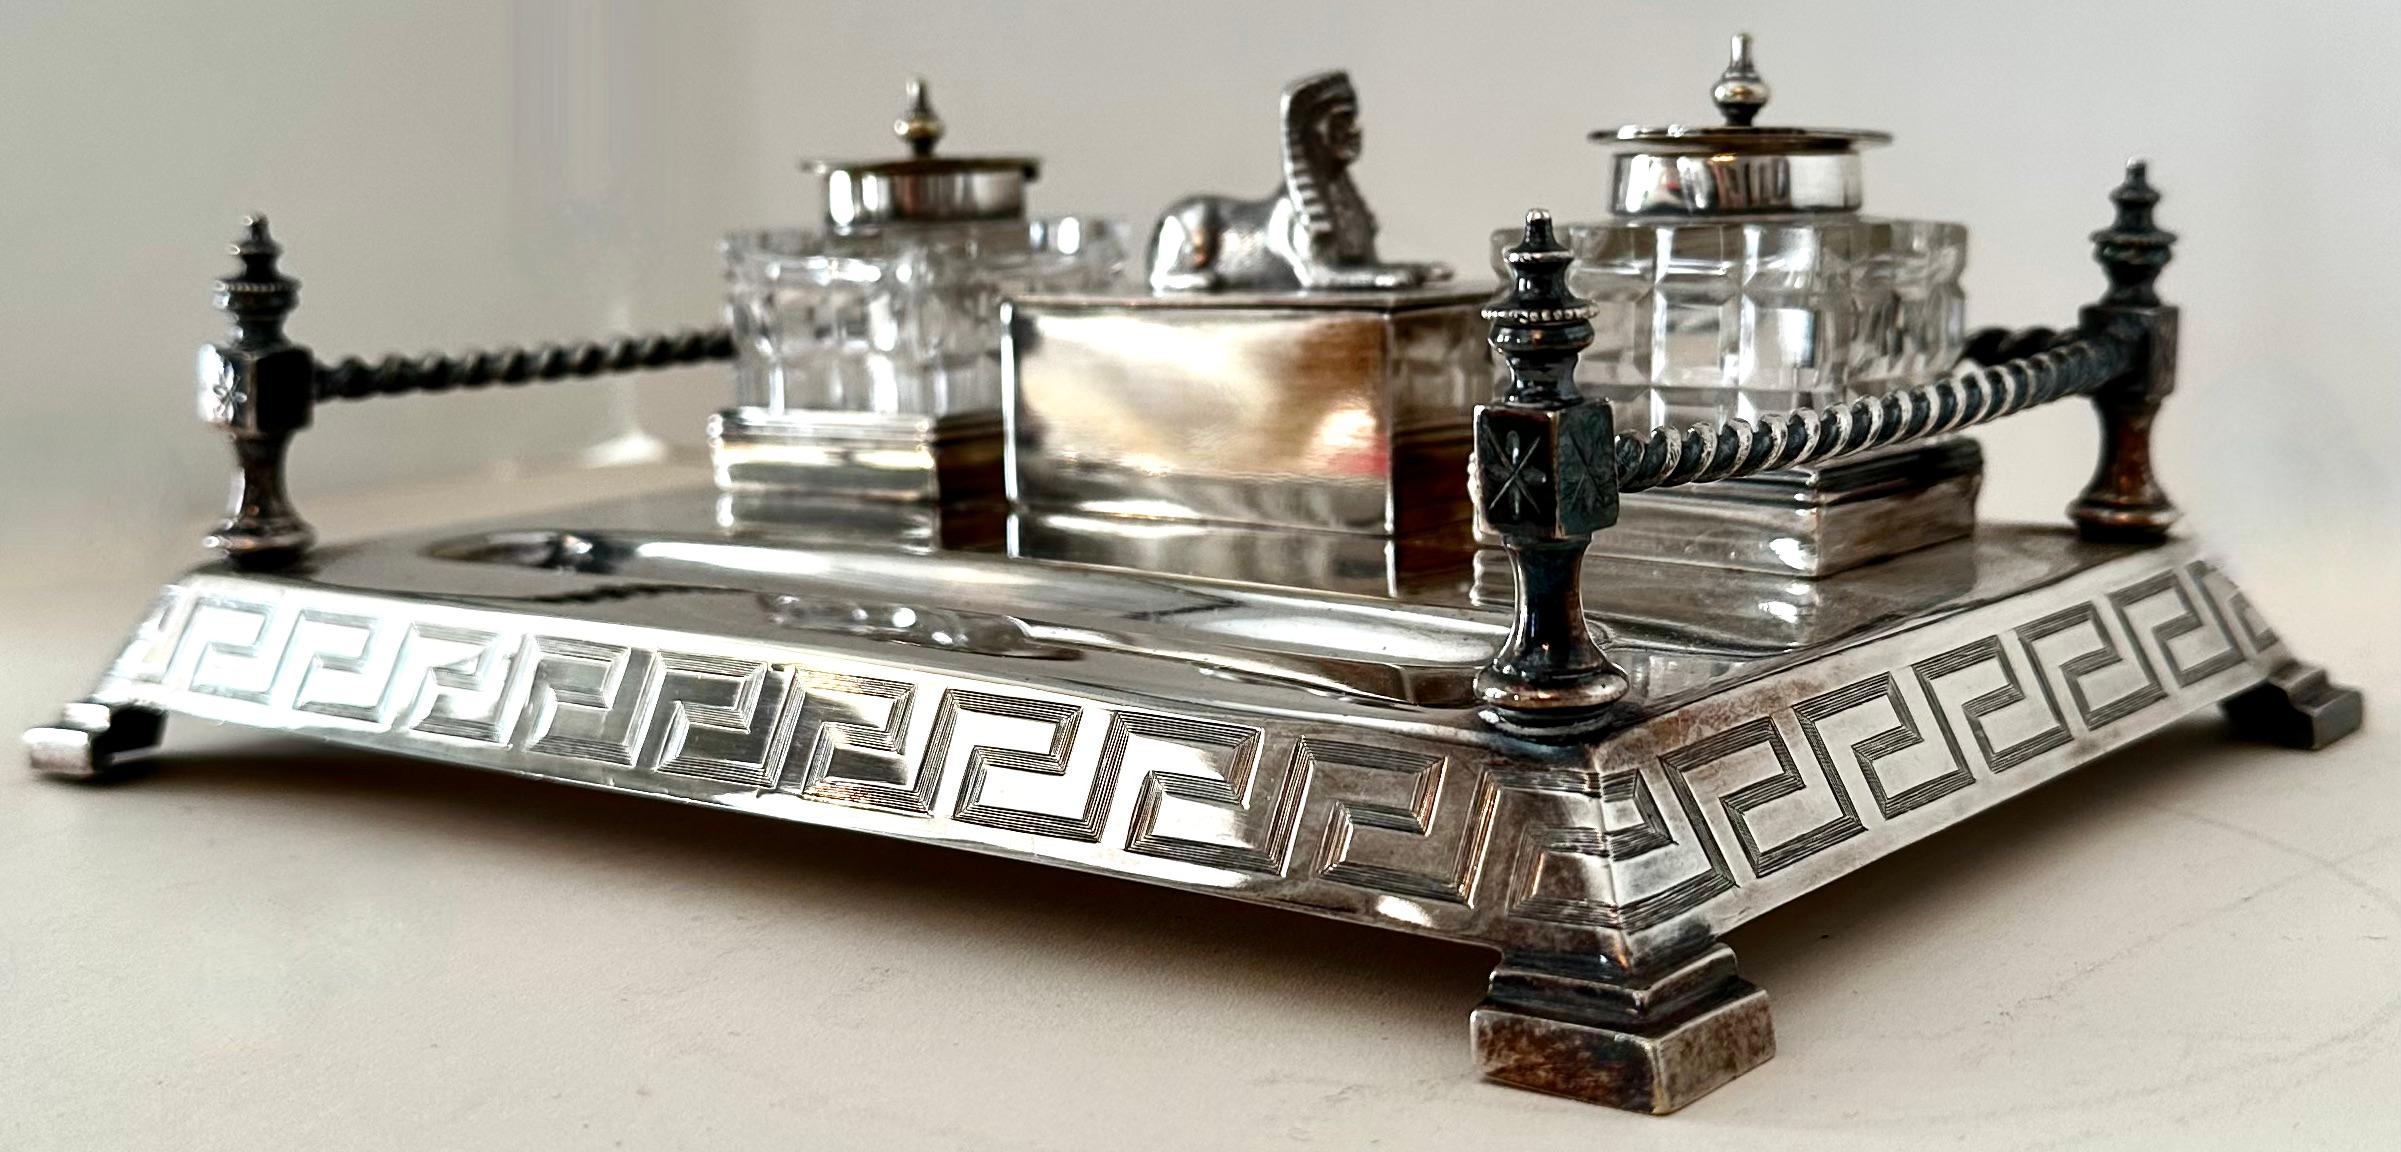 A stunning silver plate ink well with two cut crystal ink wells - both capped with a silver top and greek key trim. A center storage piece is presented with a Sphinx removable lid.

The tray has a gallery and corner feet. 

A stunning piece